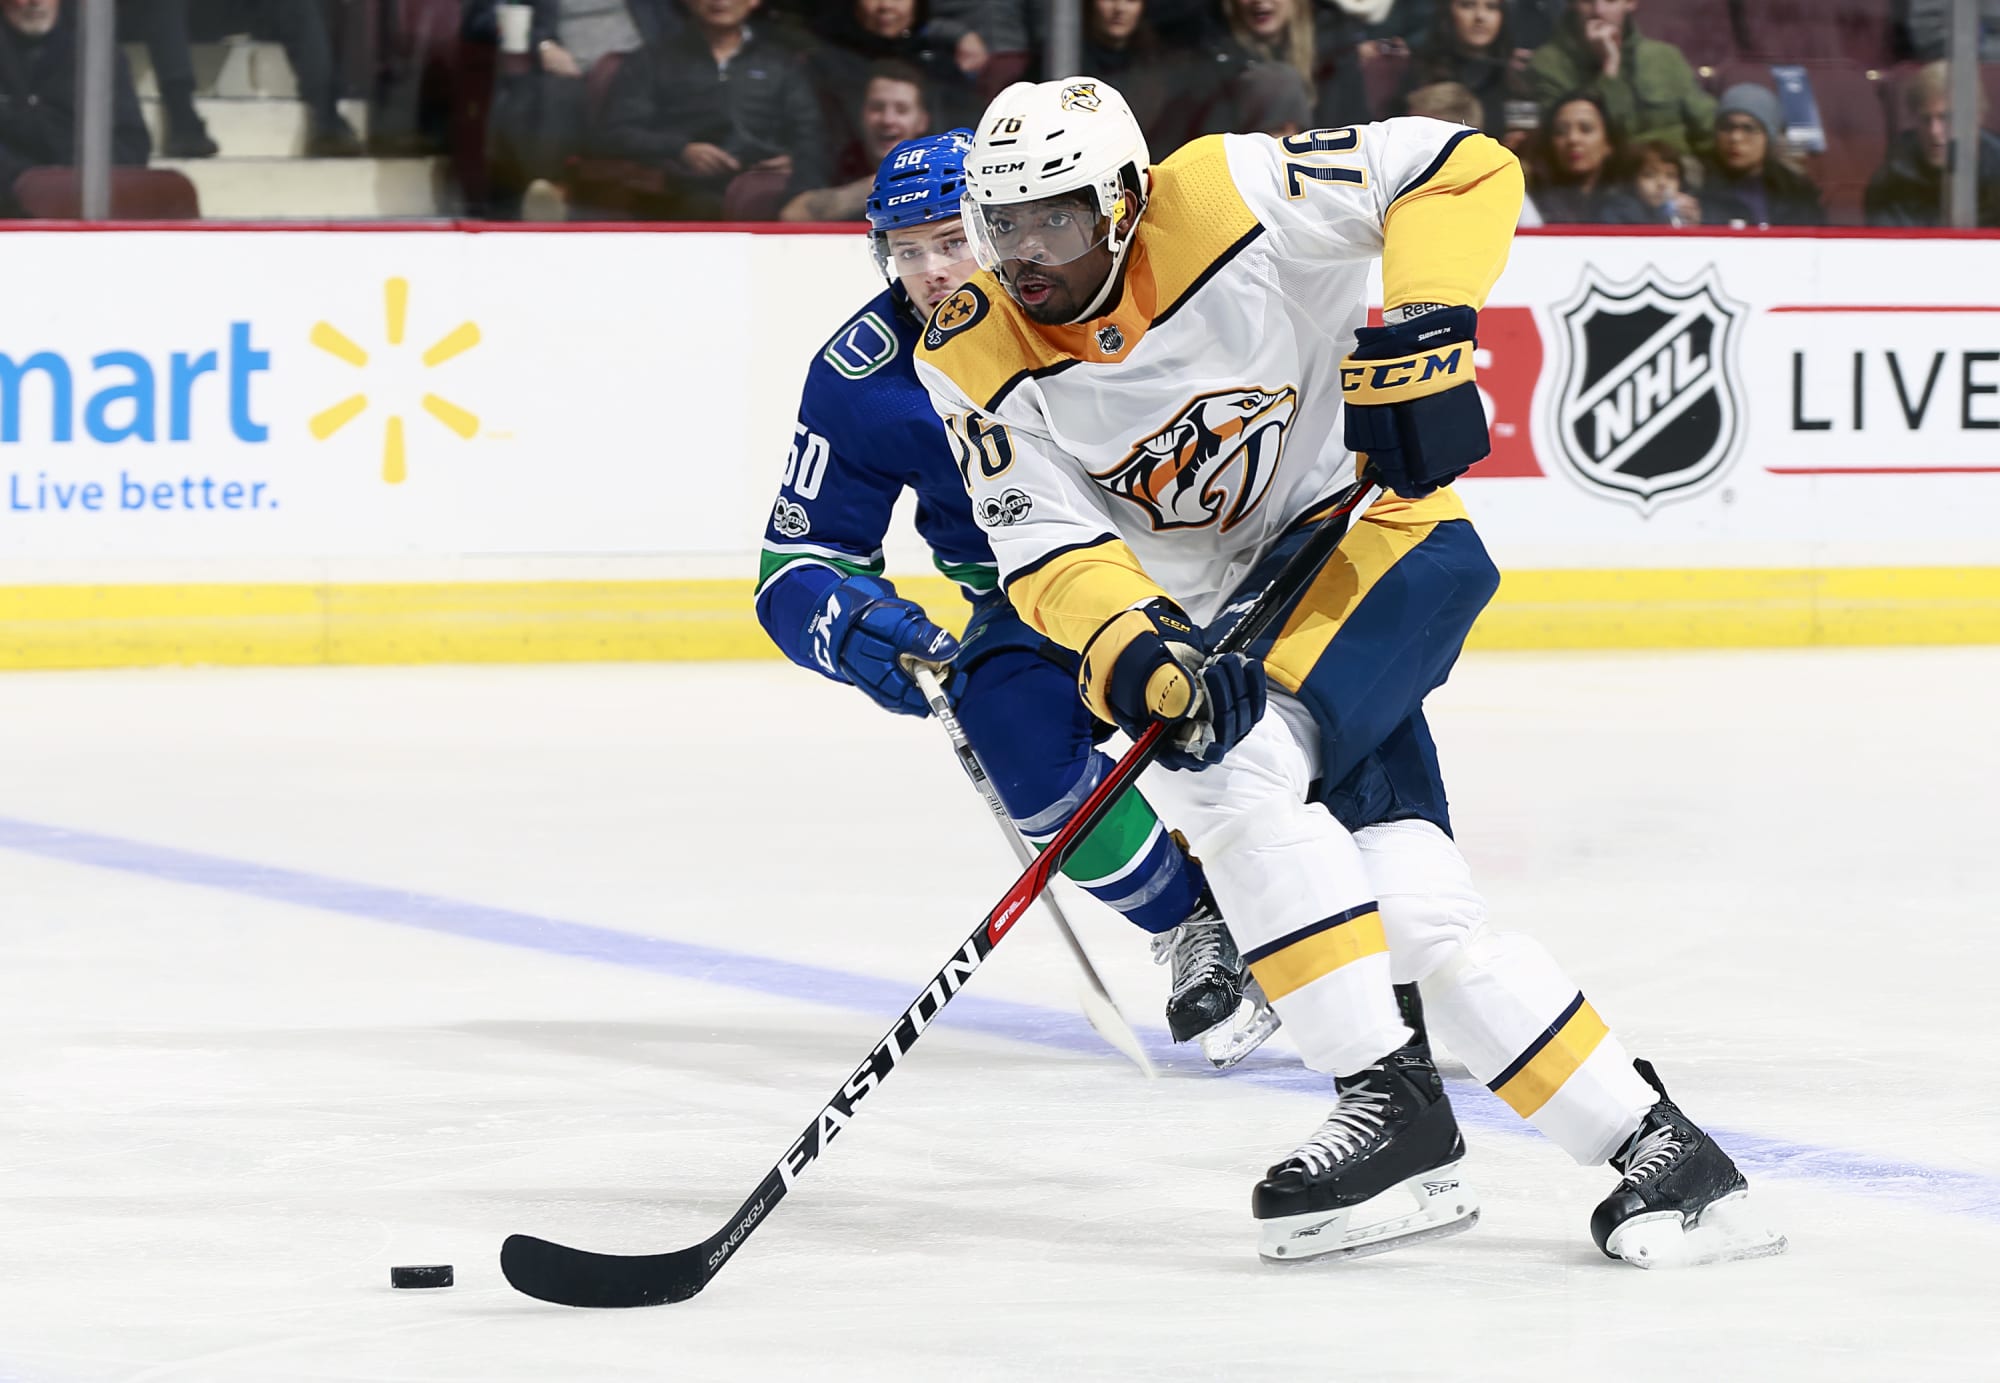 Could Devils PK Subban Join the Vancouver Canucks - Vancouver Hockey Now